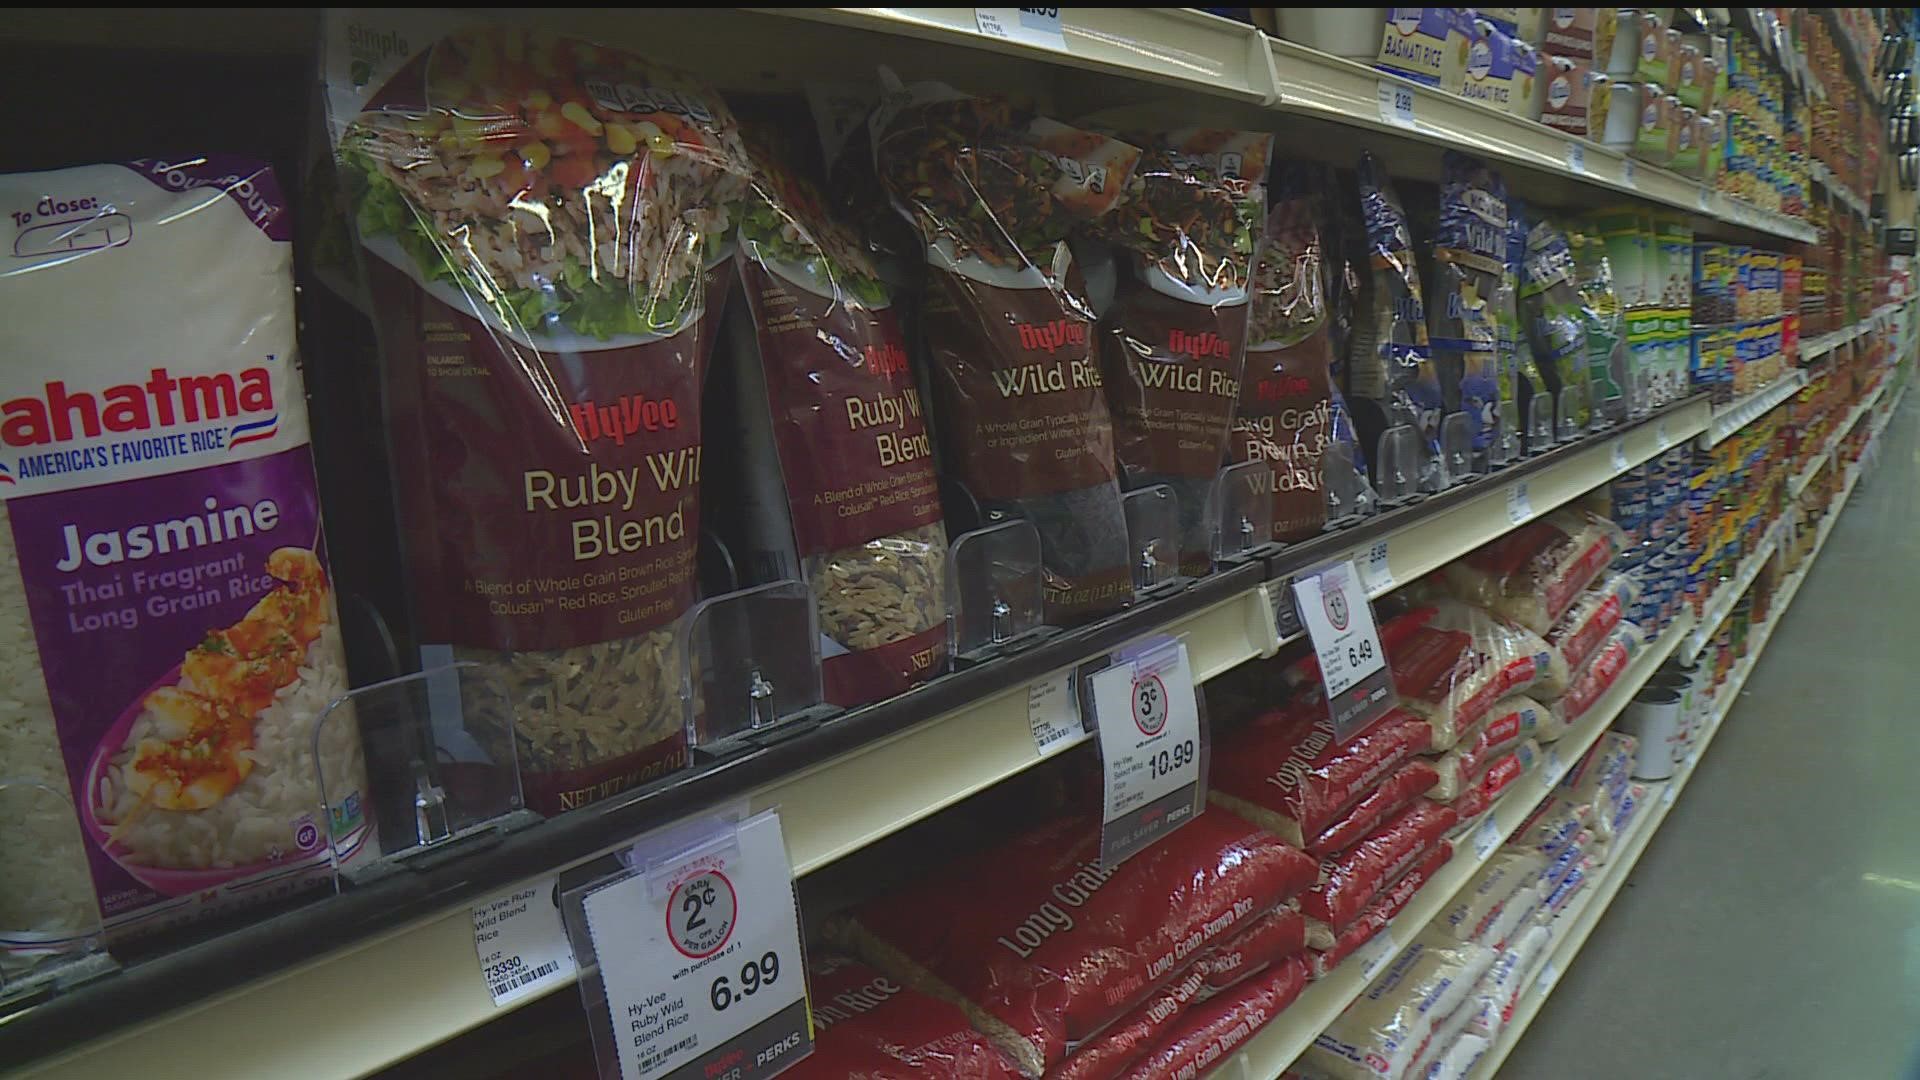 Food prices have gone up across the board, but some food groups are seeing smaller increases than others.